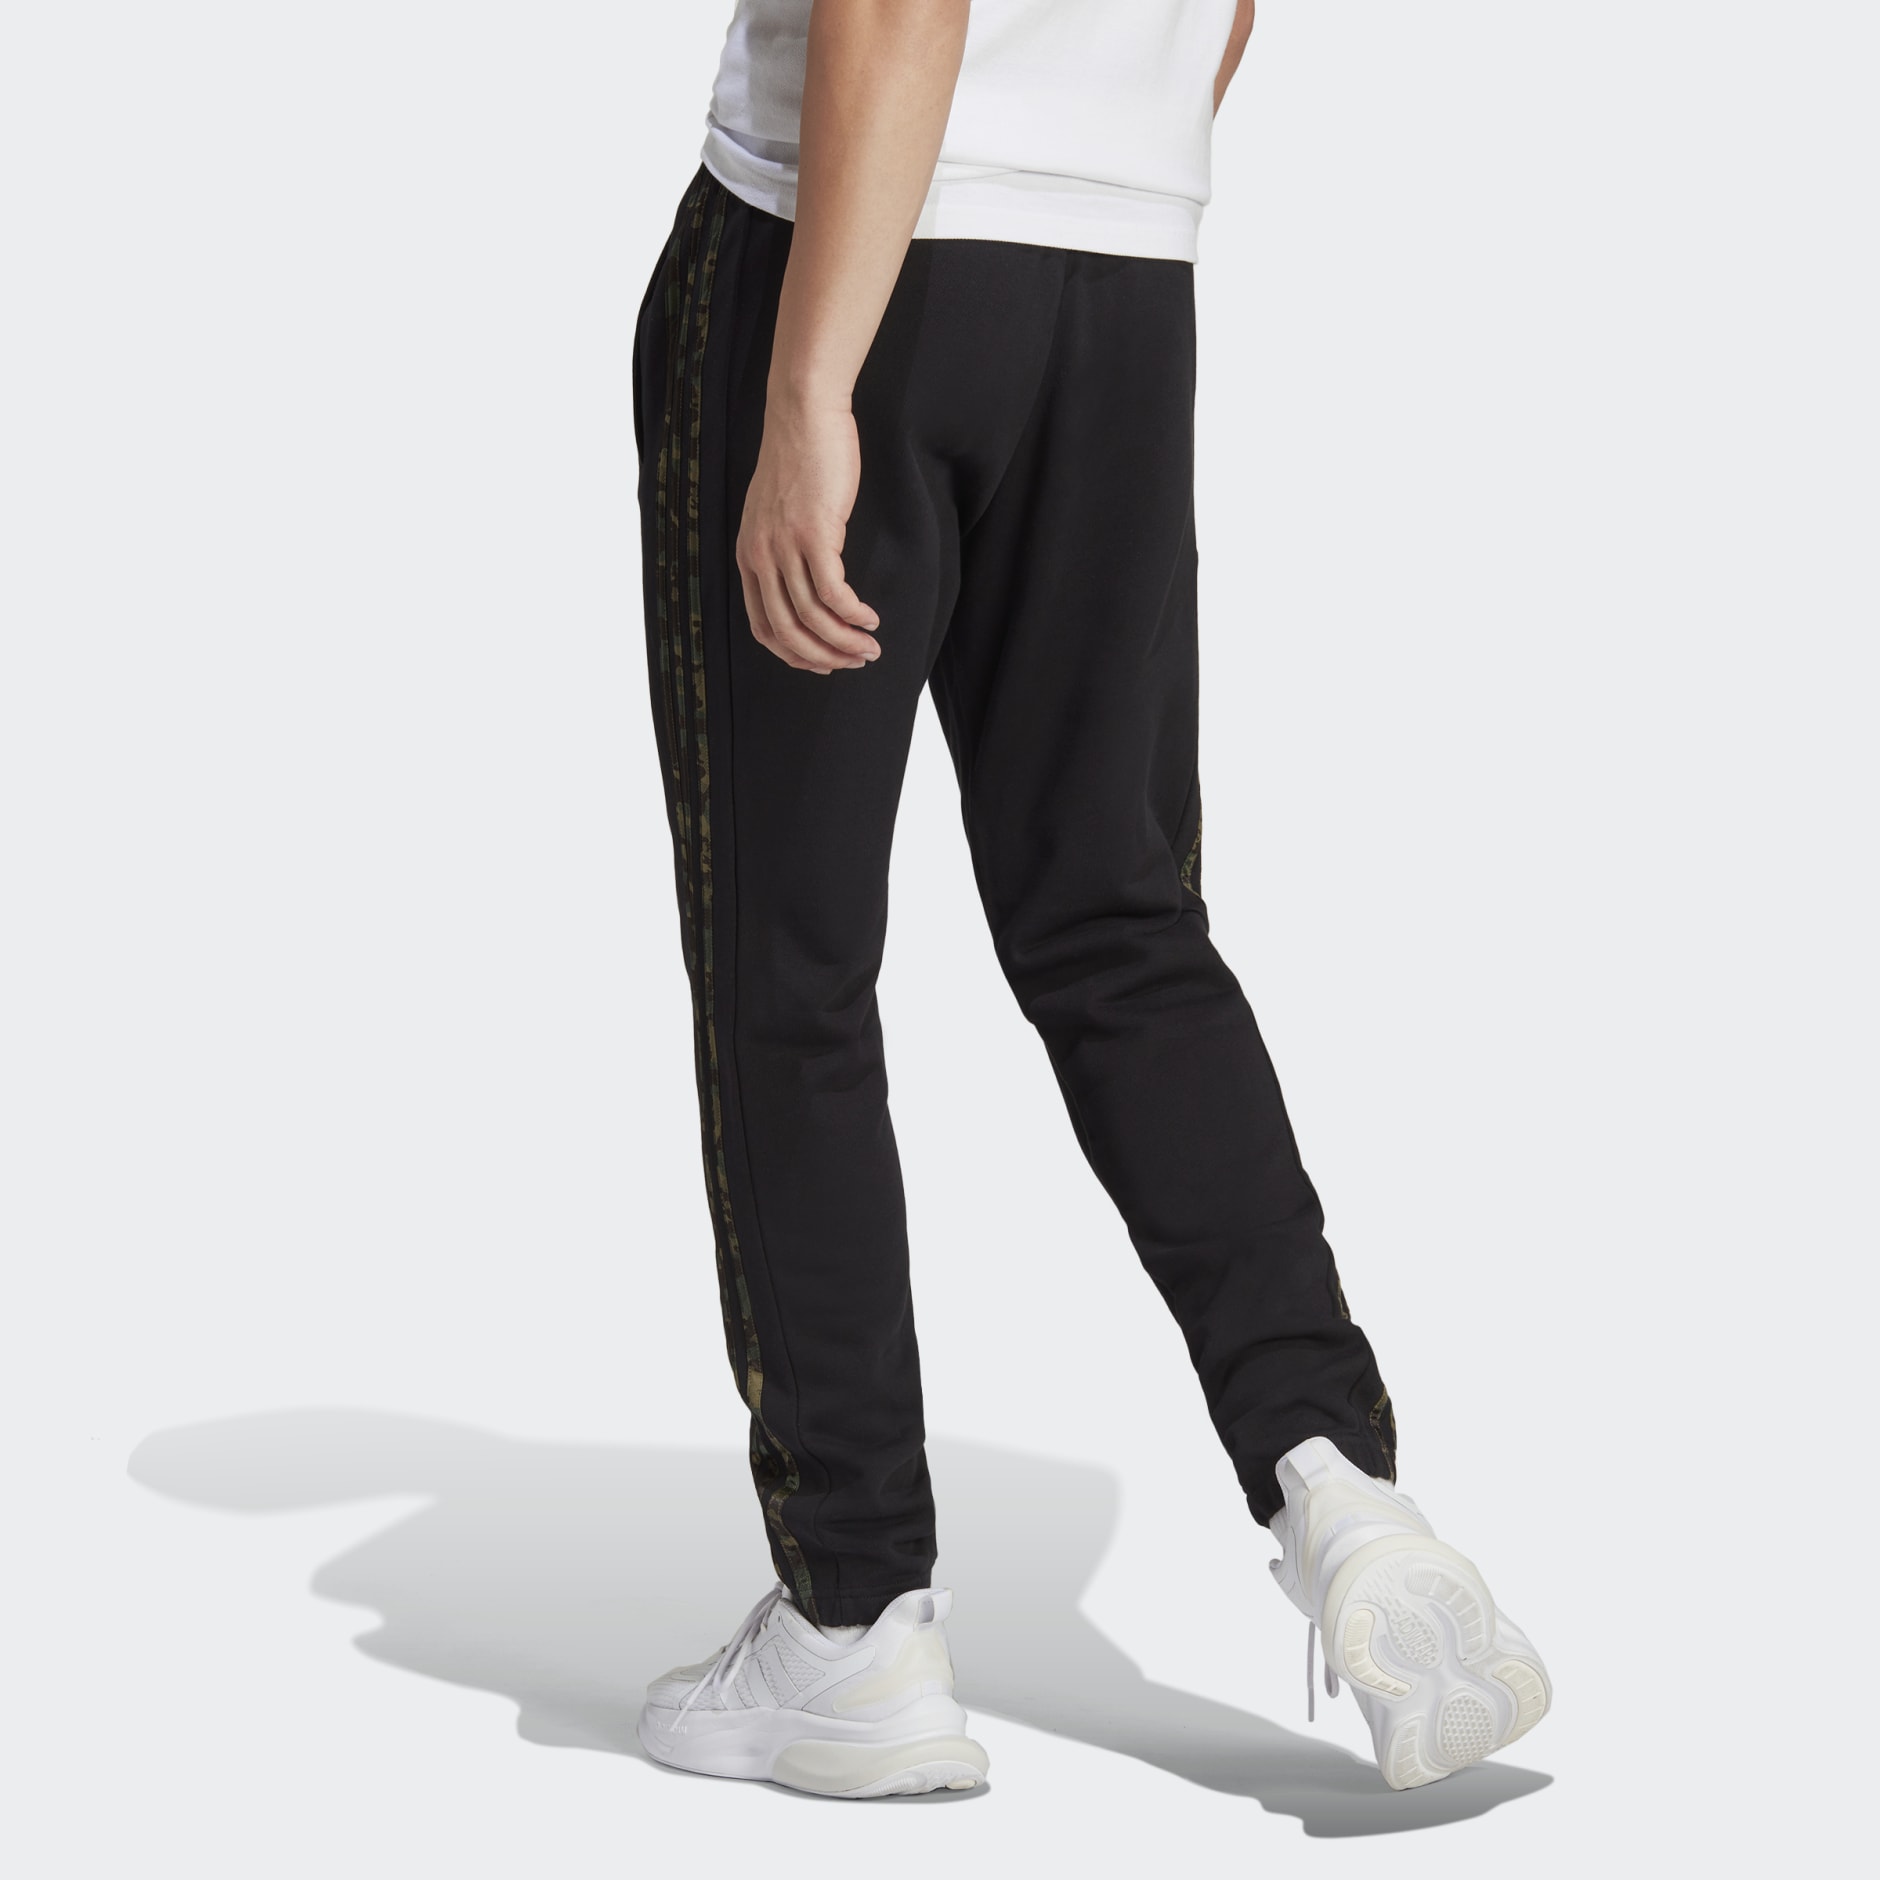 Adidas pants men's spring new Year of the Dragon casual cotton trousers  black men's sports pants